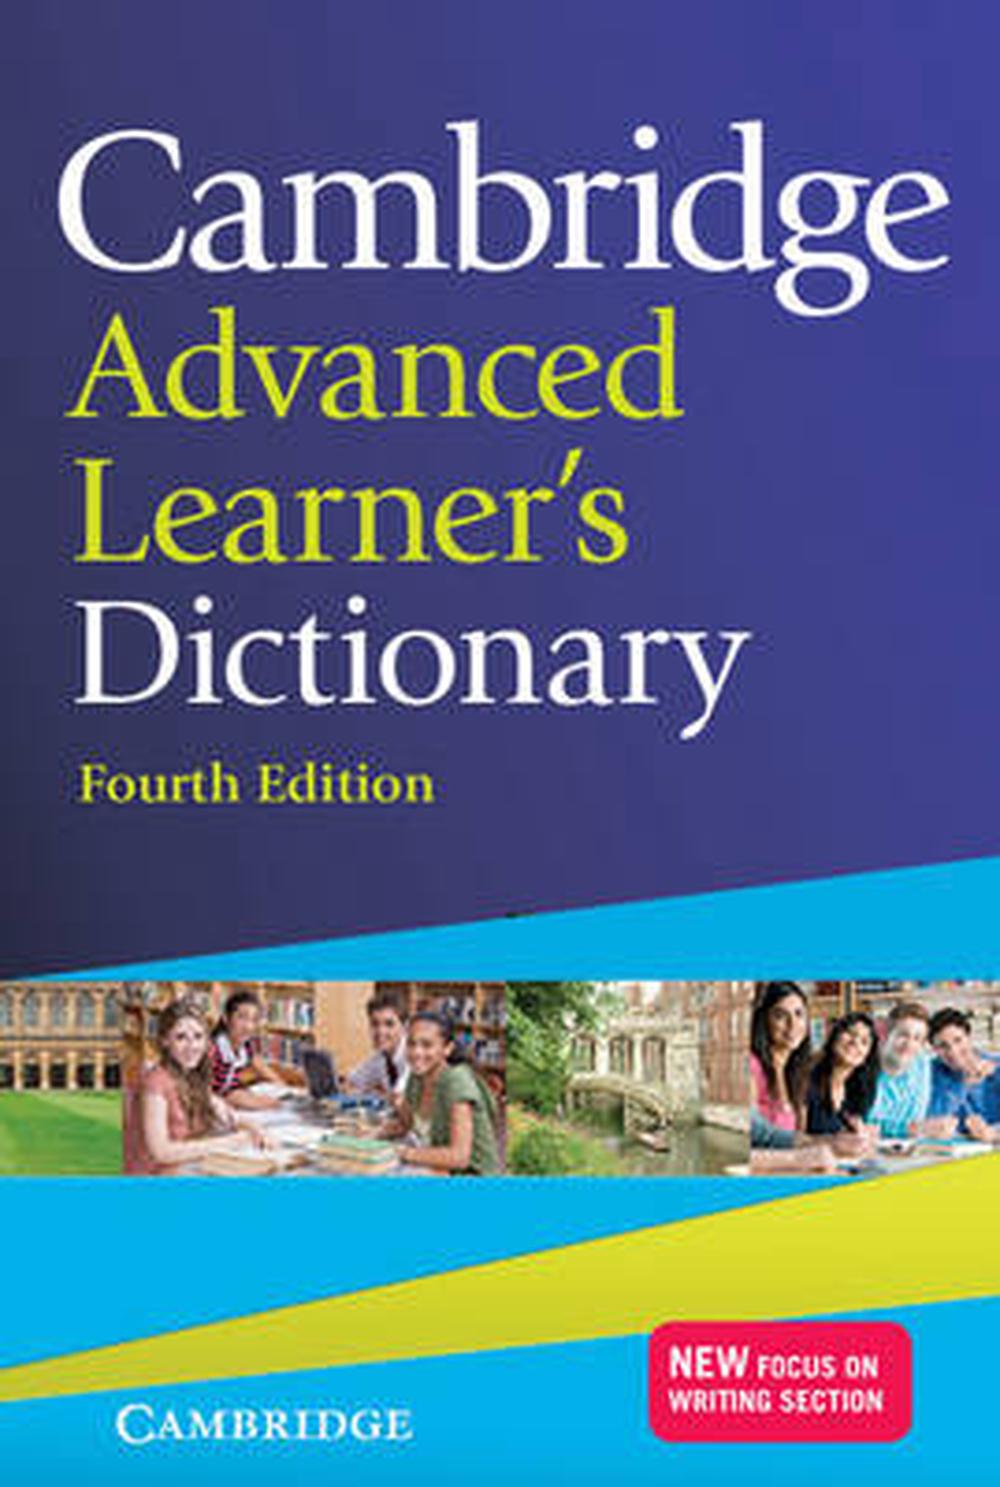 cambridge-advanced-learner-s-dictionary-by-colin-mcintosh-english-hardcover-bo-9781107035157